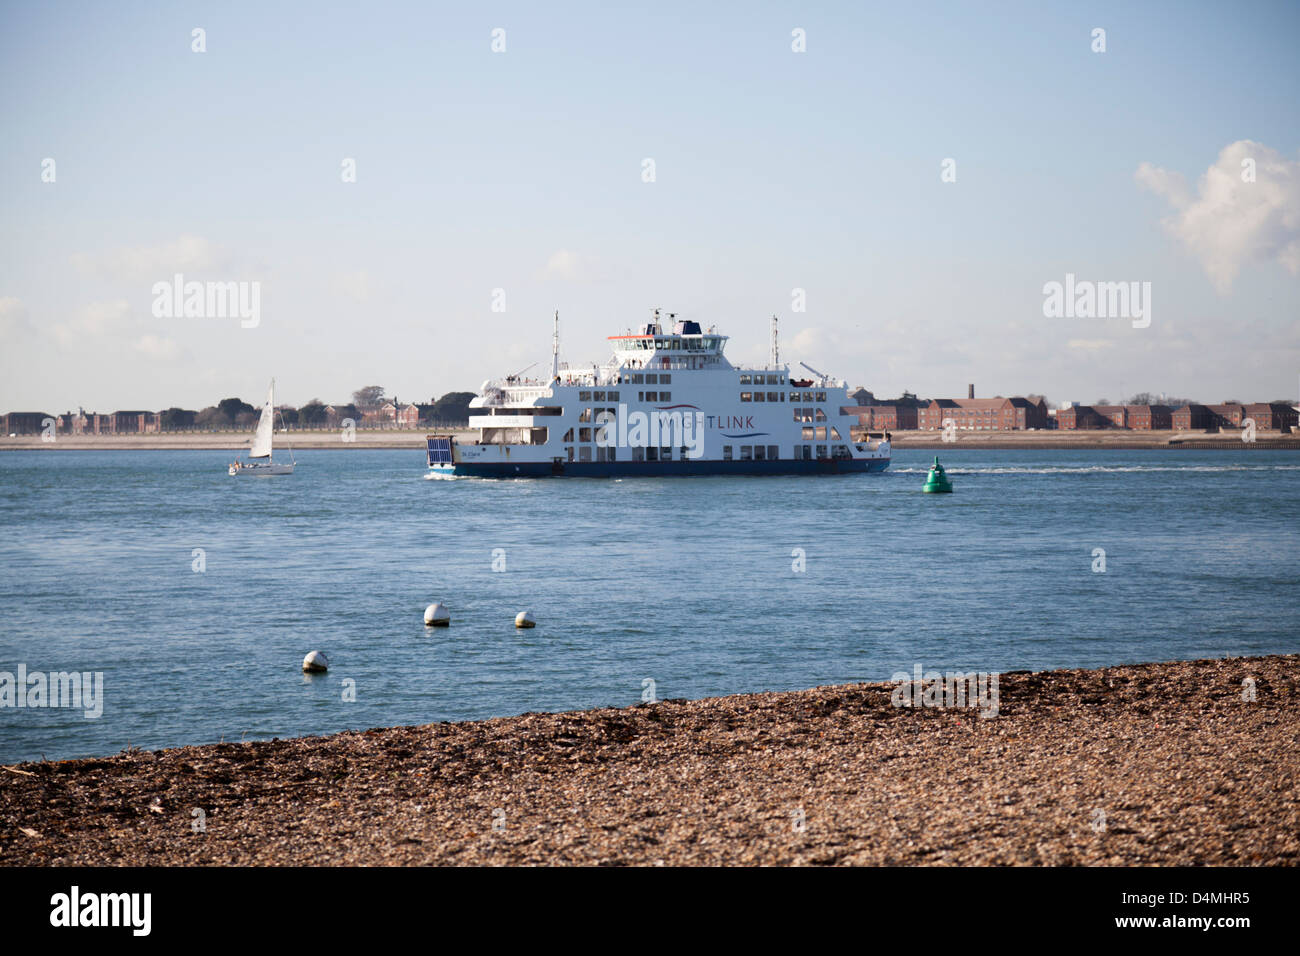 A Wightlink car ferry, St. Clare, in the Solent heading out of Portsmouth Harbour to Fishbourne on the Isle of Wight Stock Photo